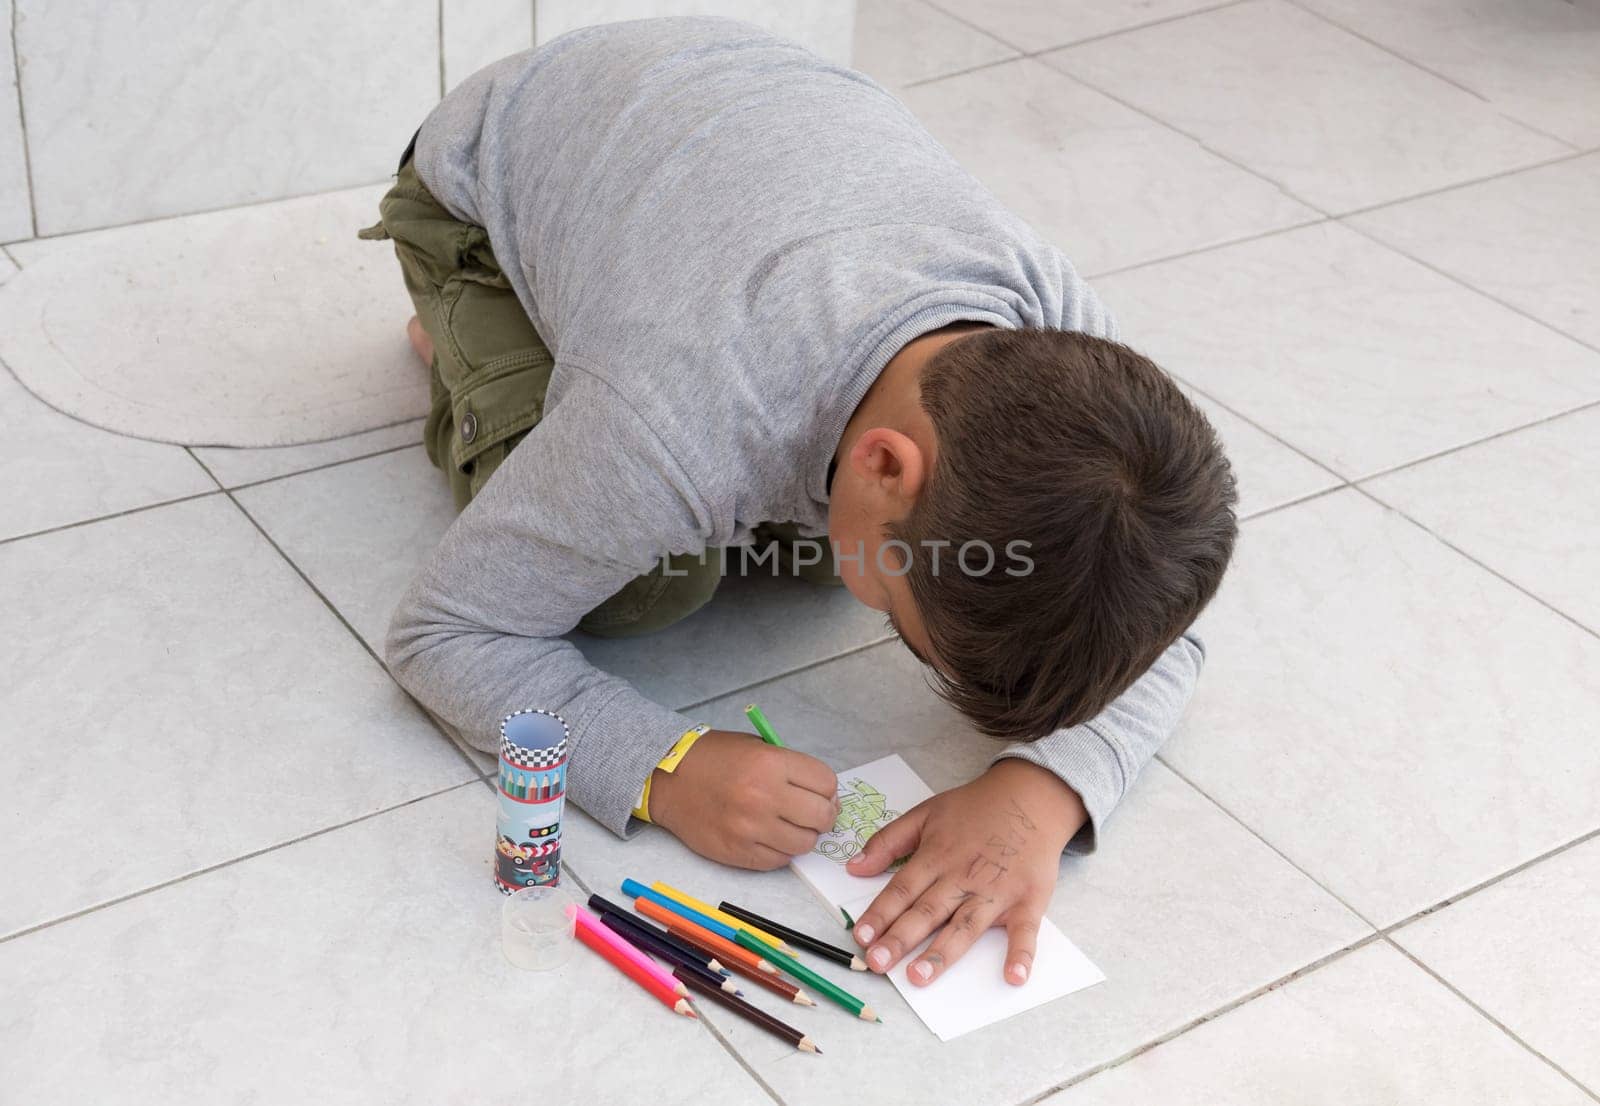 A black-haired boy draws on the floor in his notebook with colored pencils, there are no limits to creativity by KaterinaDalemans